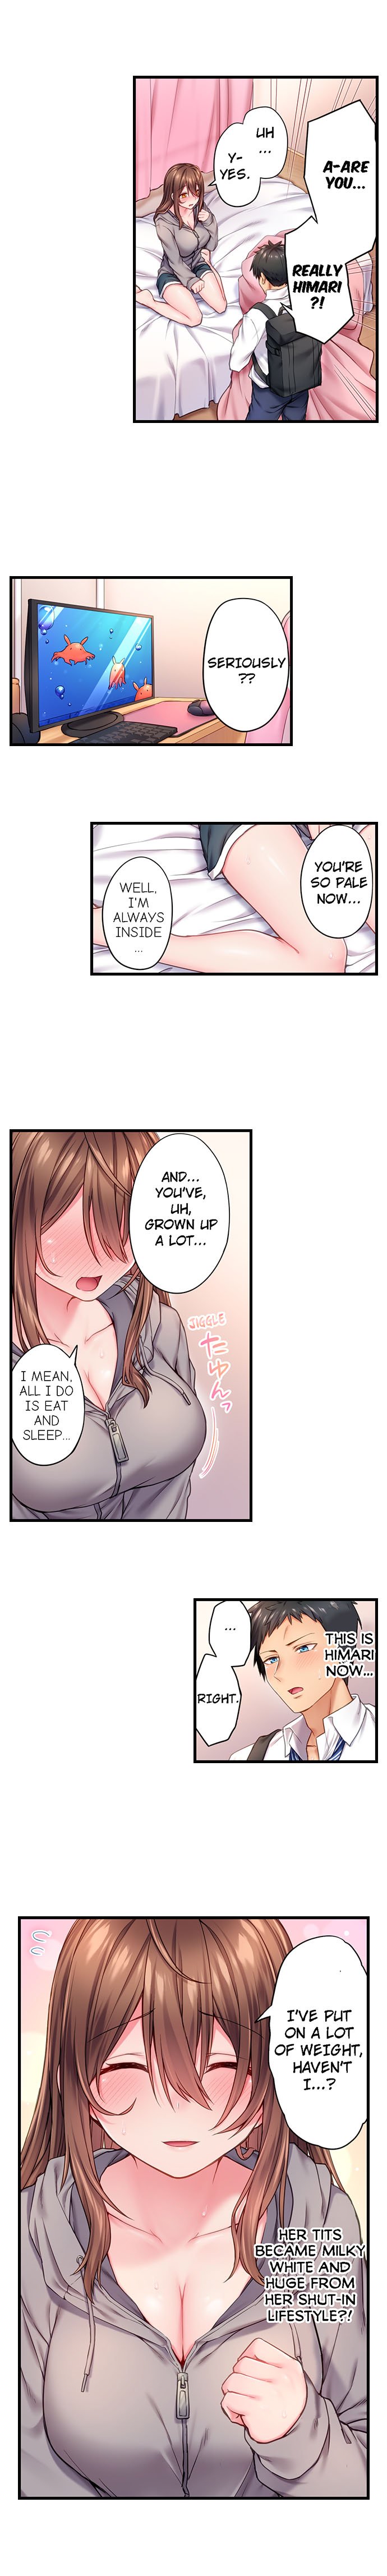 Can’t Believe My Loner Childhood Friend Became This Sexy Girl - Chapter 1 Page 9